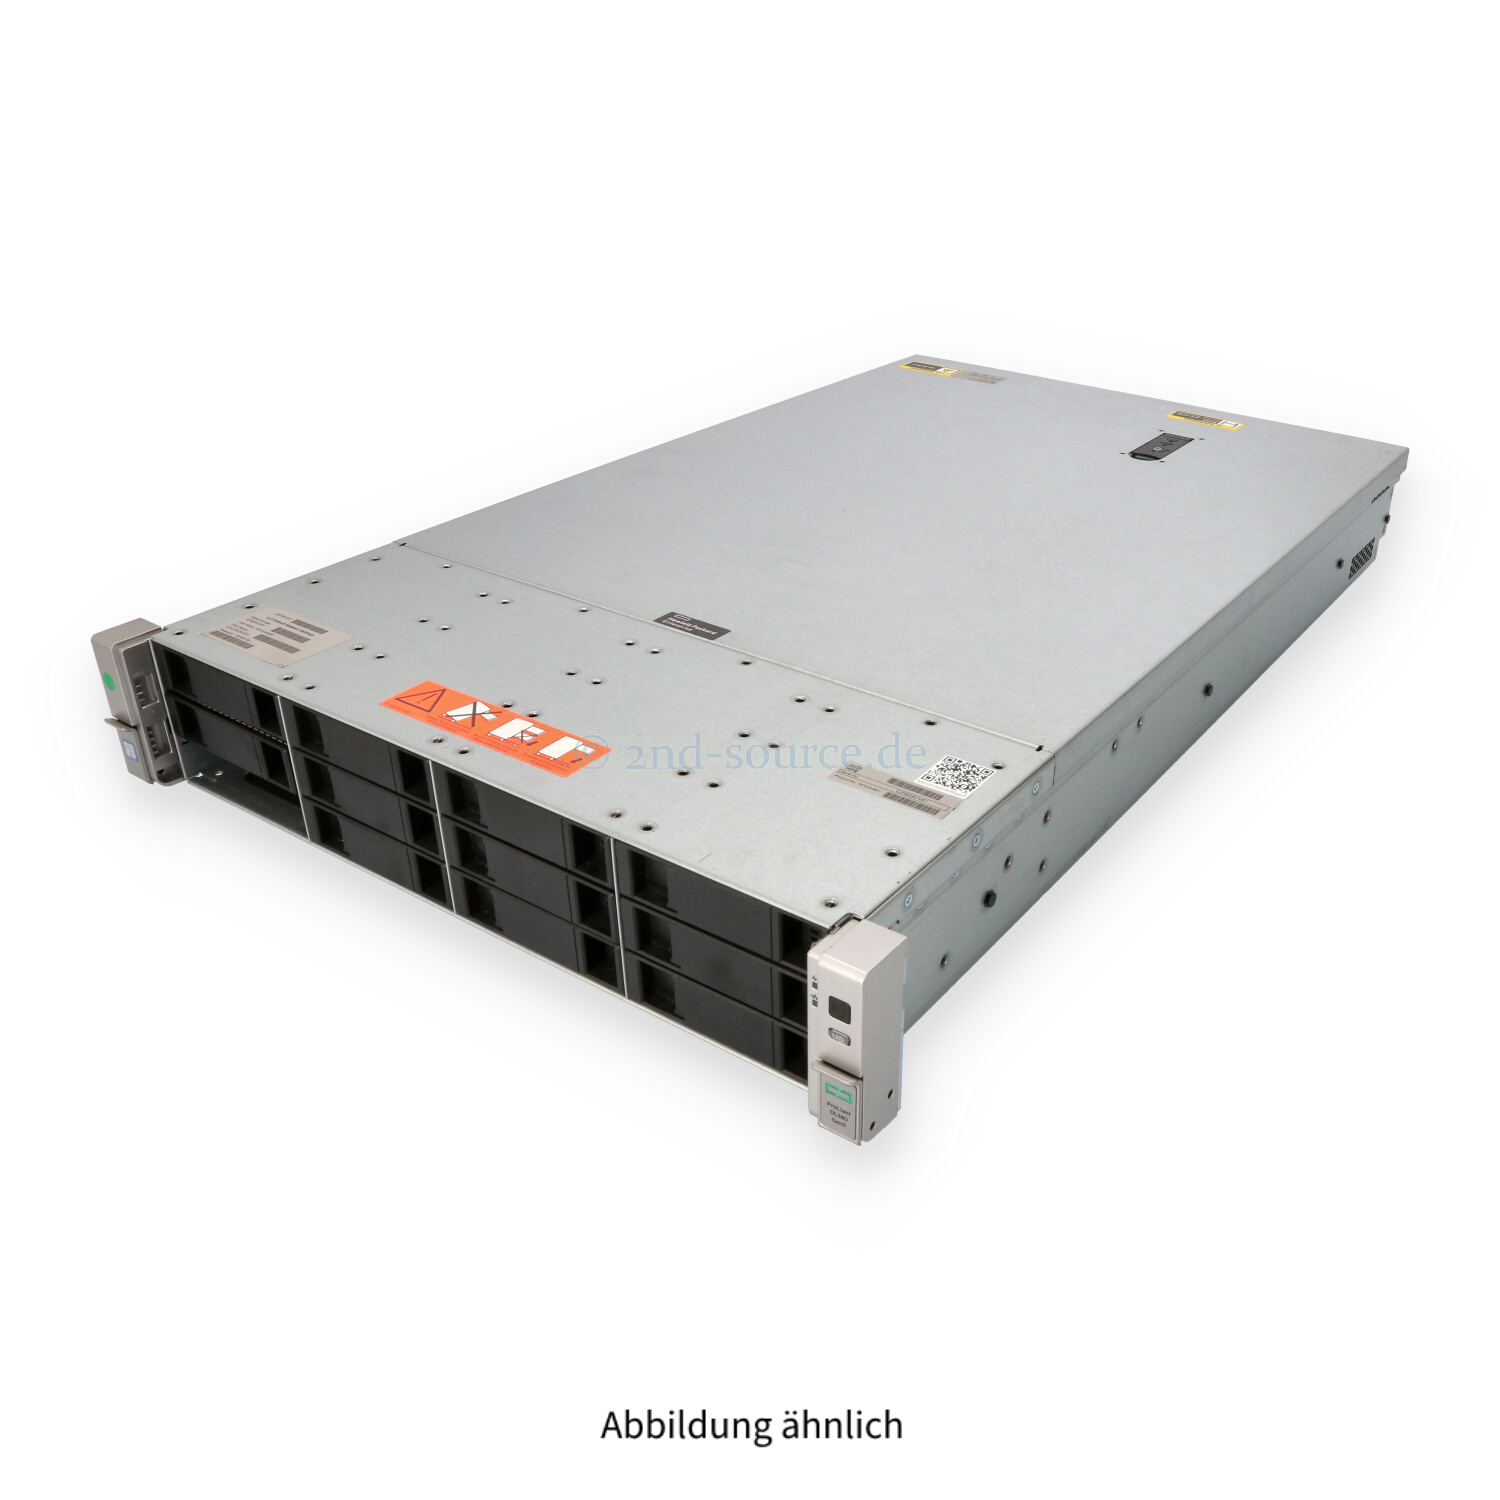 HPE DL380 G9 4x LFF CTO Chassis 767033-B21 775400-001